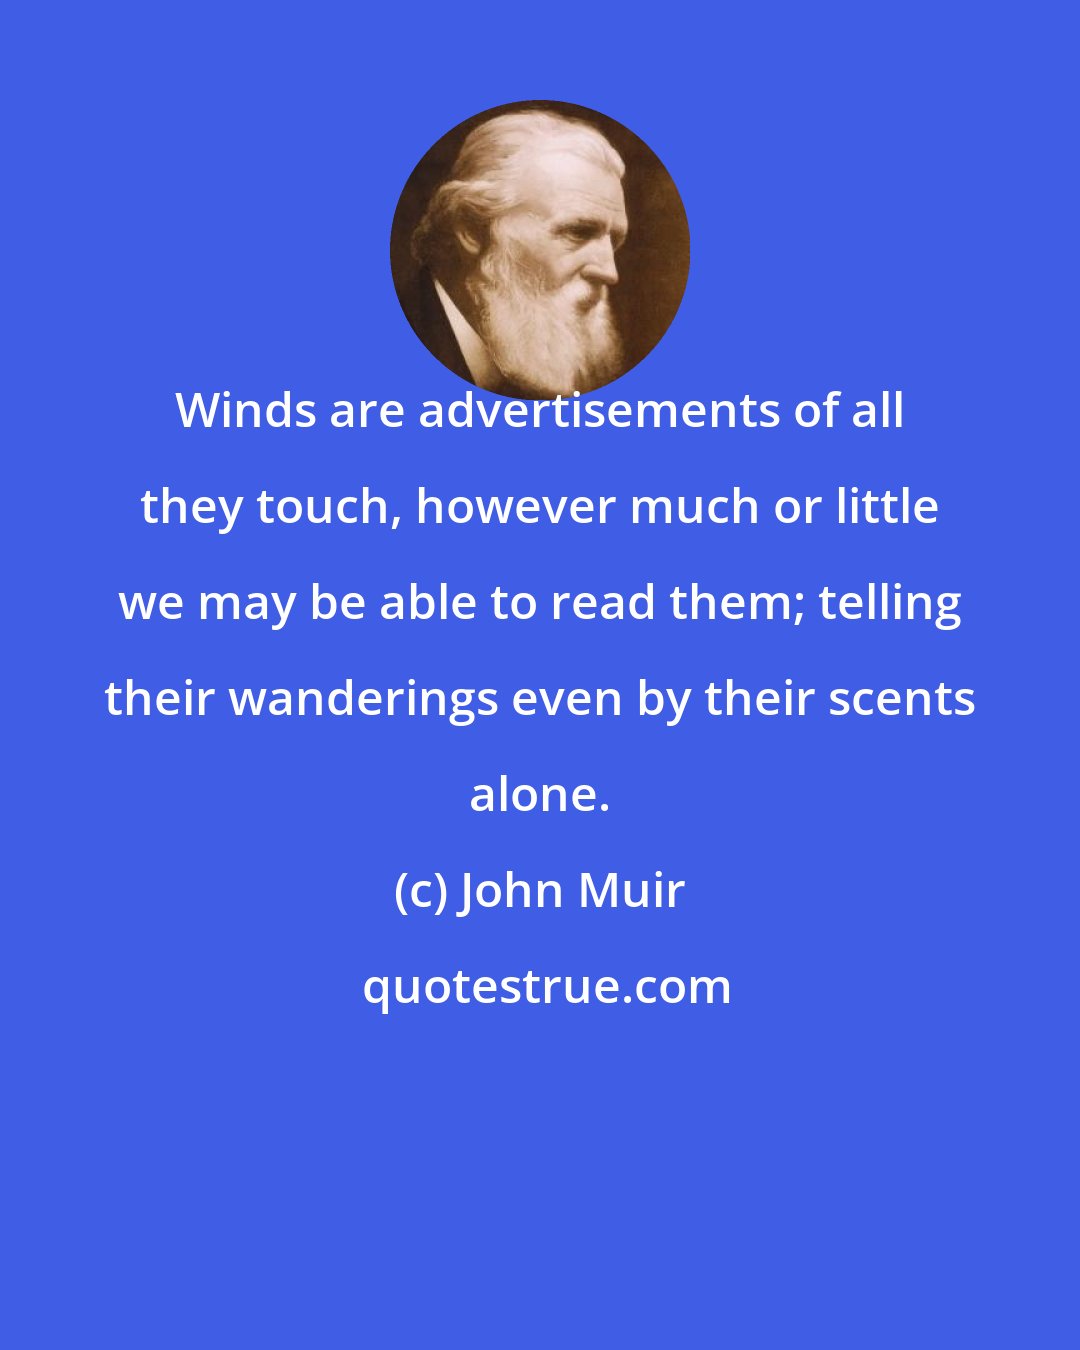 John Muir: Winds are advertisements of all they touch, however much or little we may be able to read them; telling their wanderings even by their scents alone.